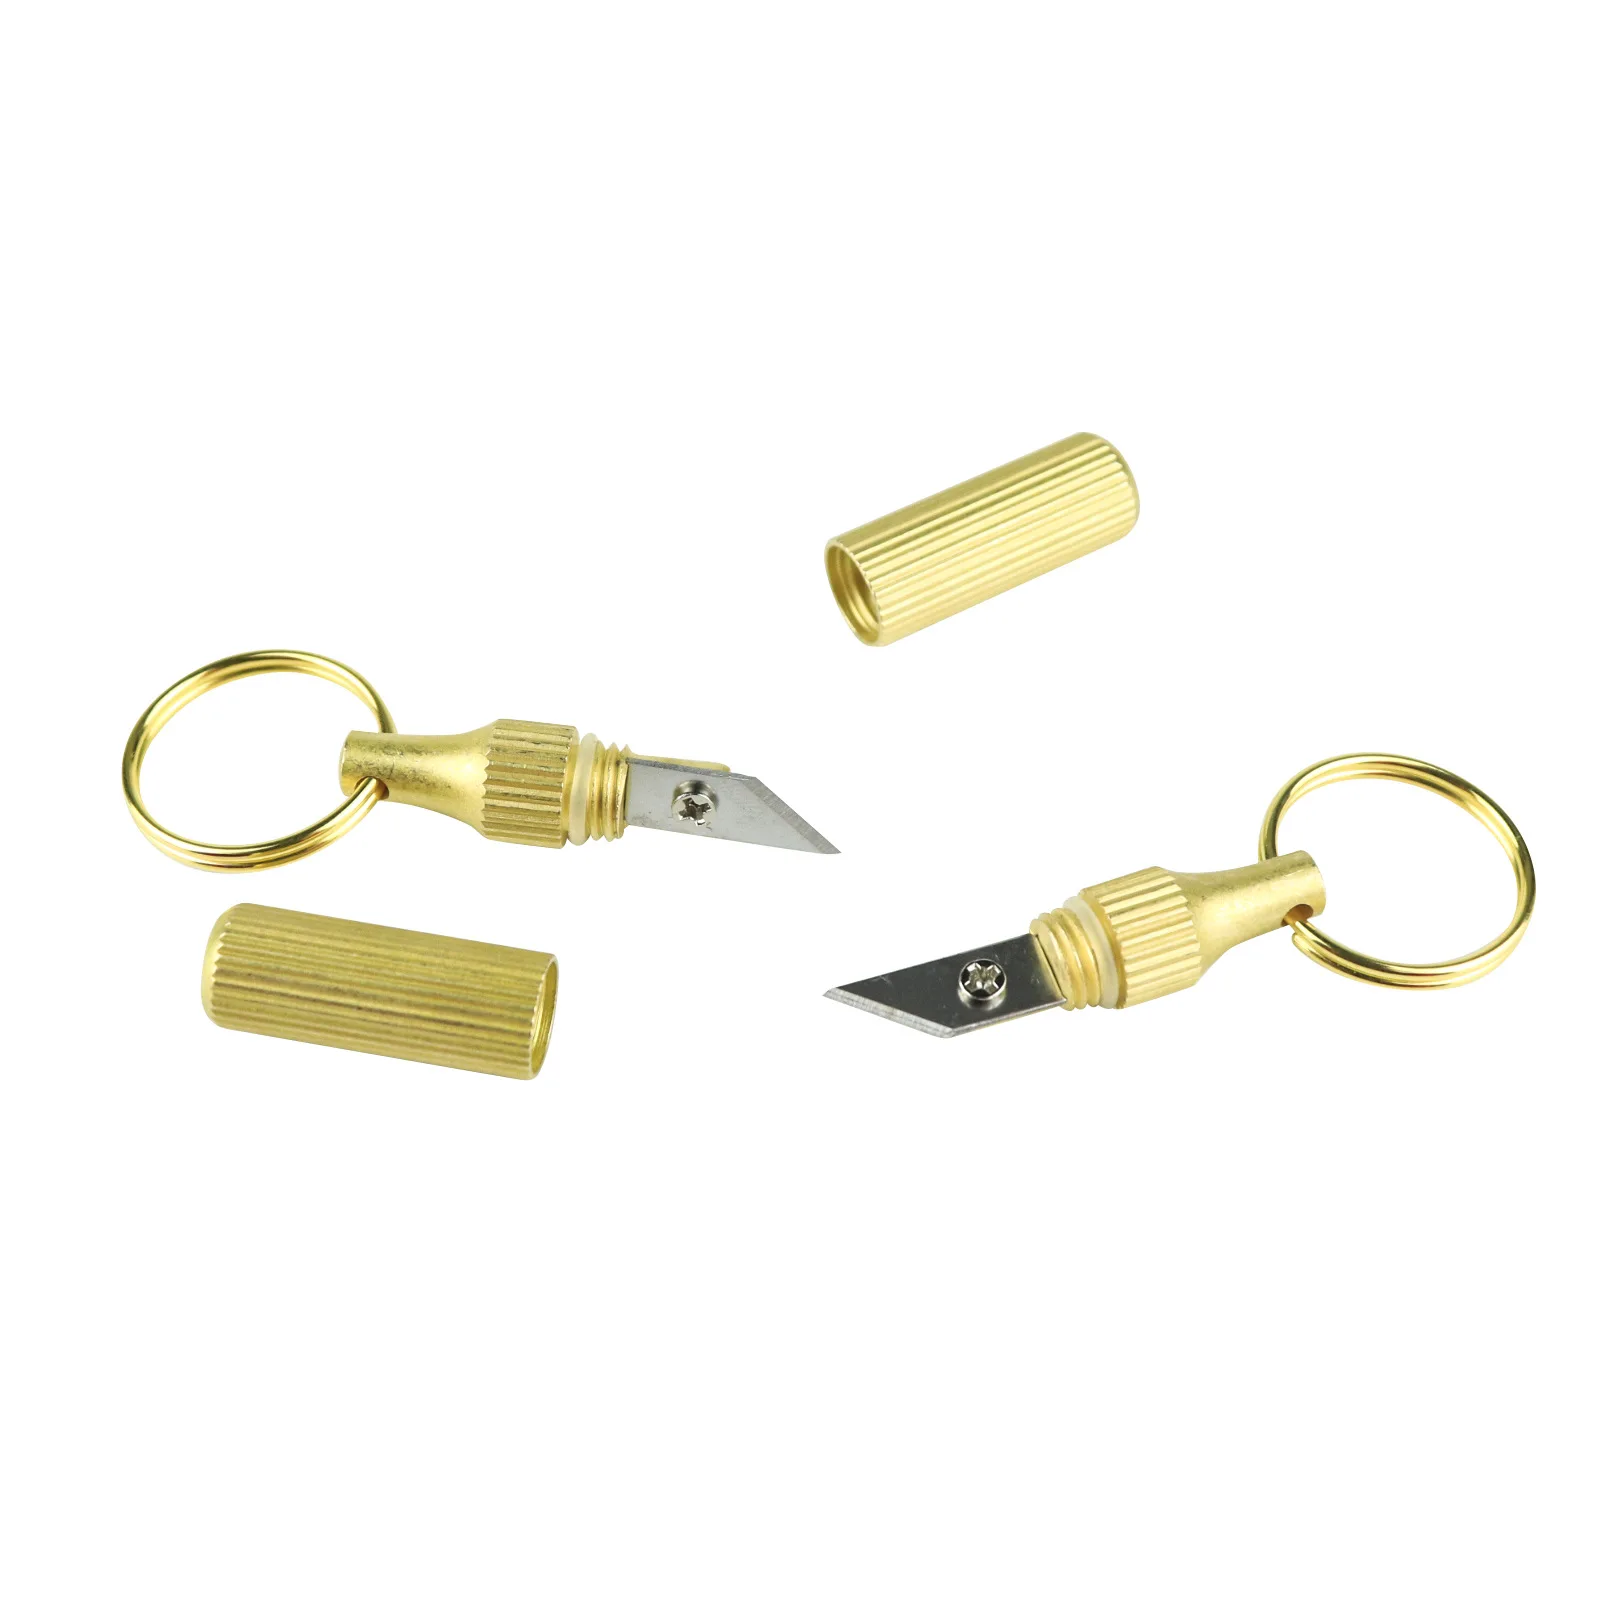 Mini brass capsule pocket knife portable survival knife edc tools keychain outdoor survival emergency mini pocket cutting tool - top knives